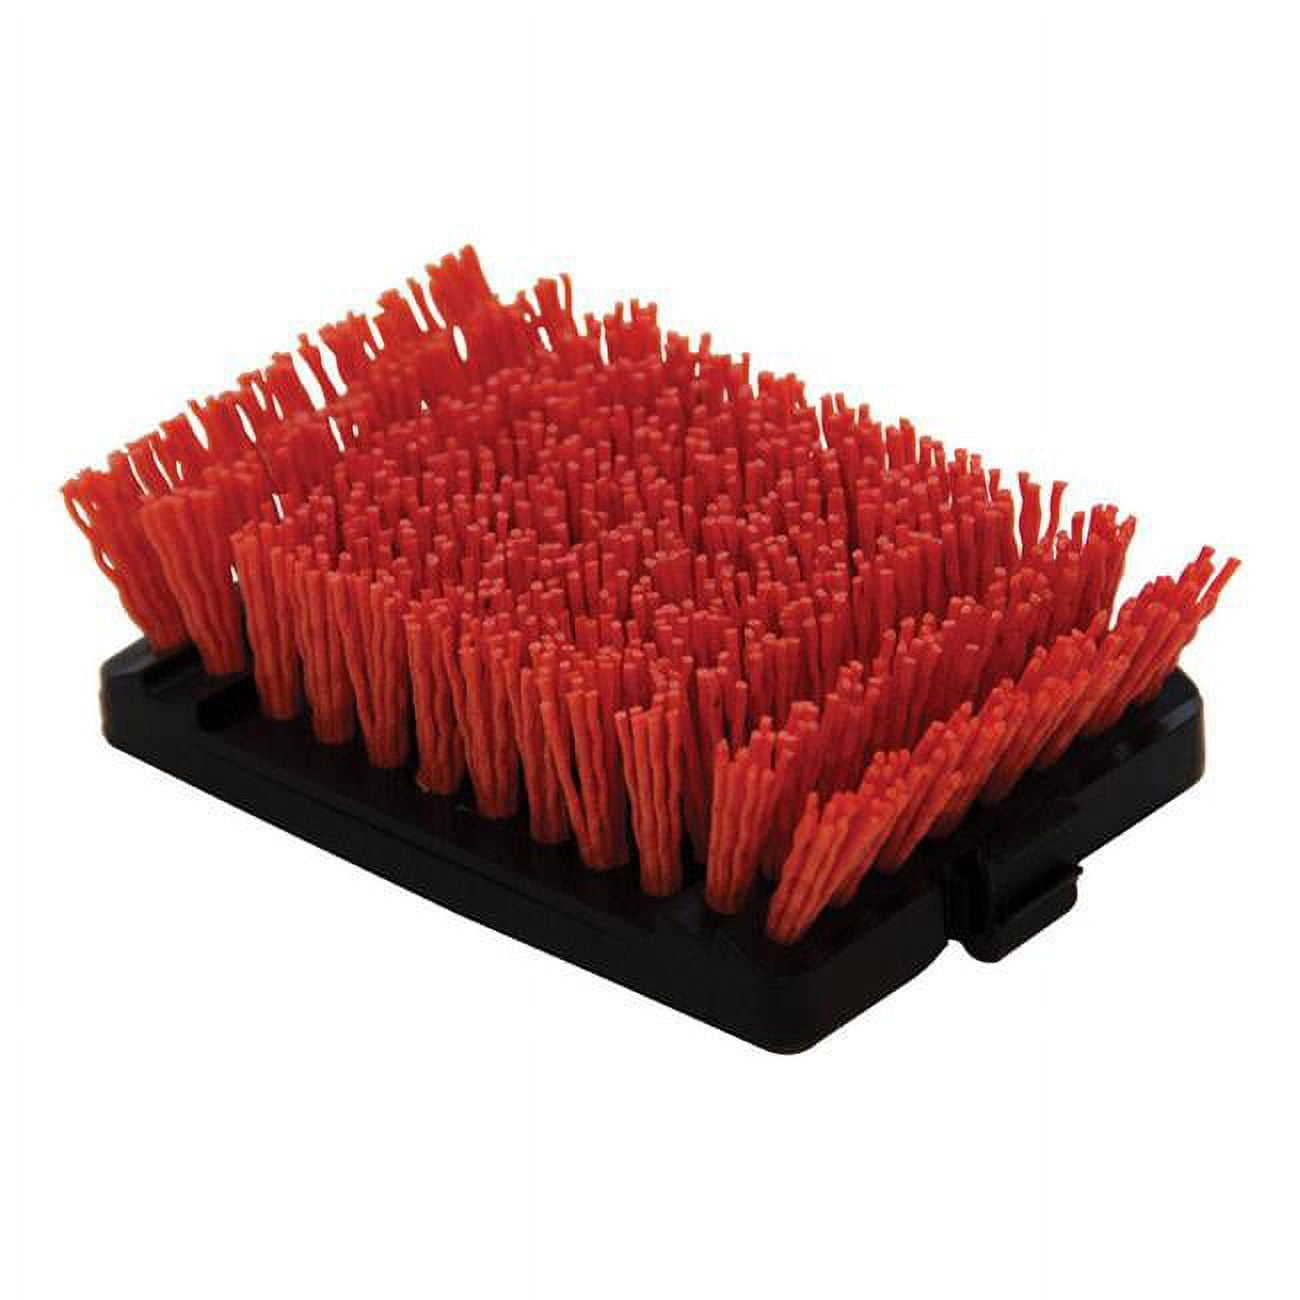 8011444 Cool-clean Polypropylene Replacement Grill Brush Head, Black & Red